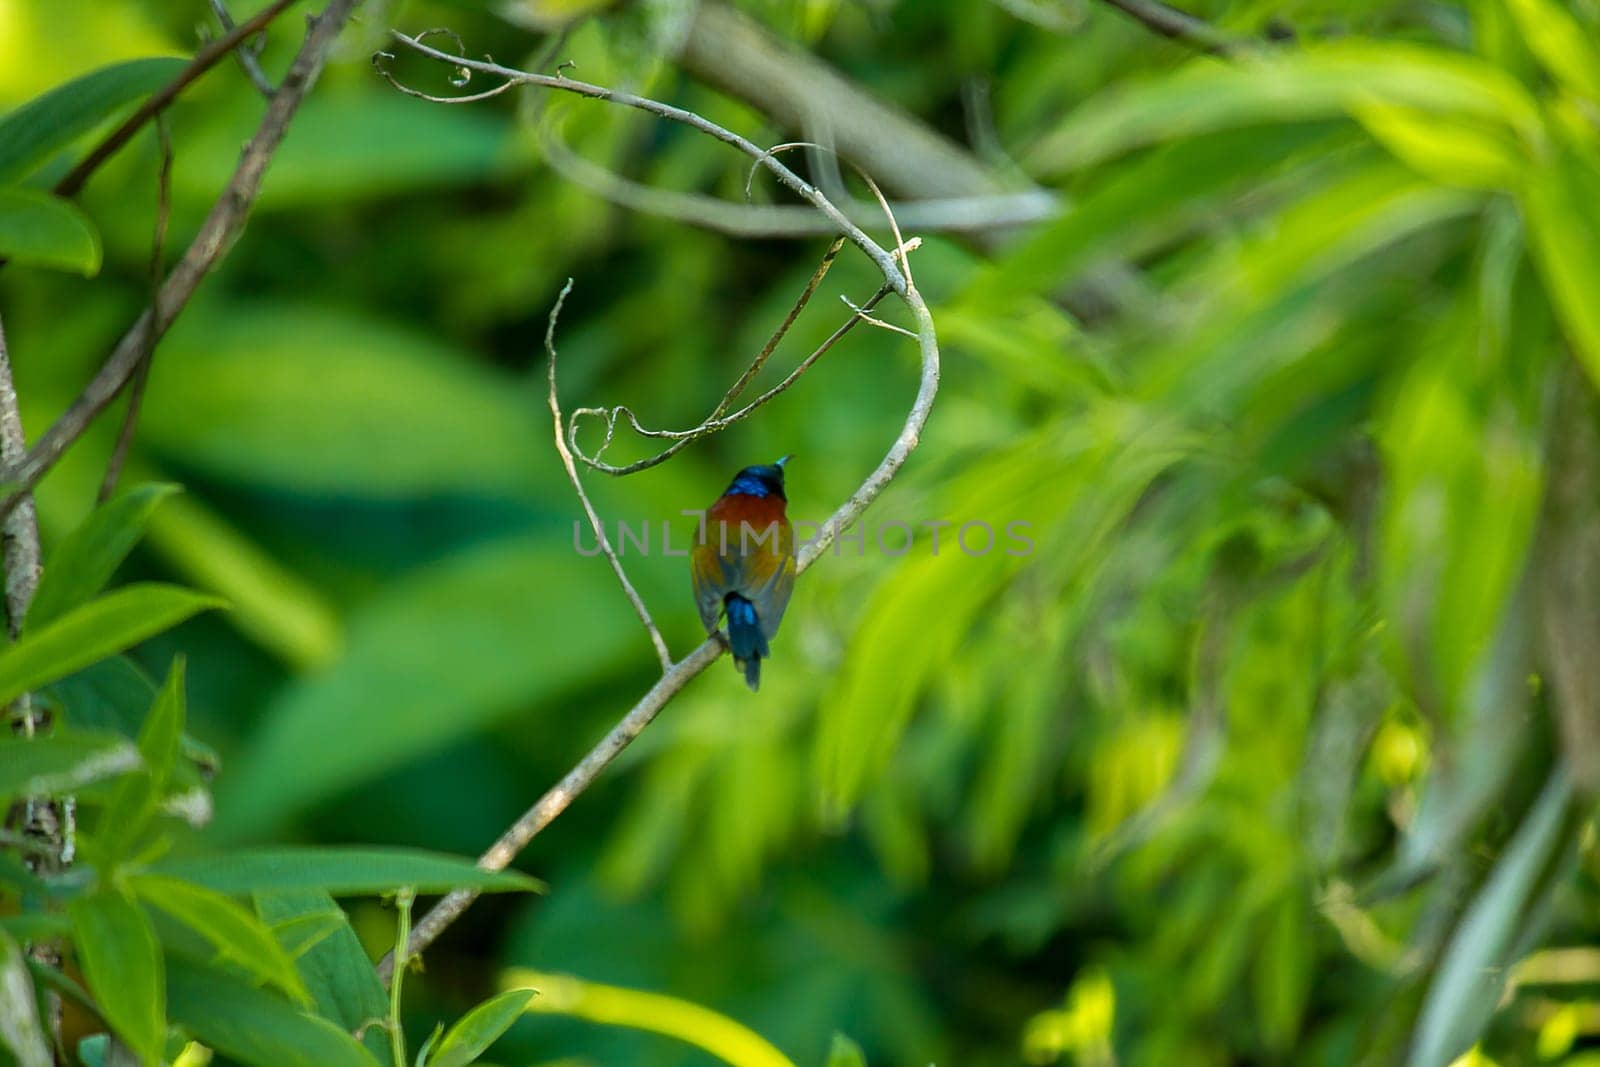 Green-tailed Sunbird on the branches Found at Doi Inthanon, Thailand